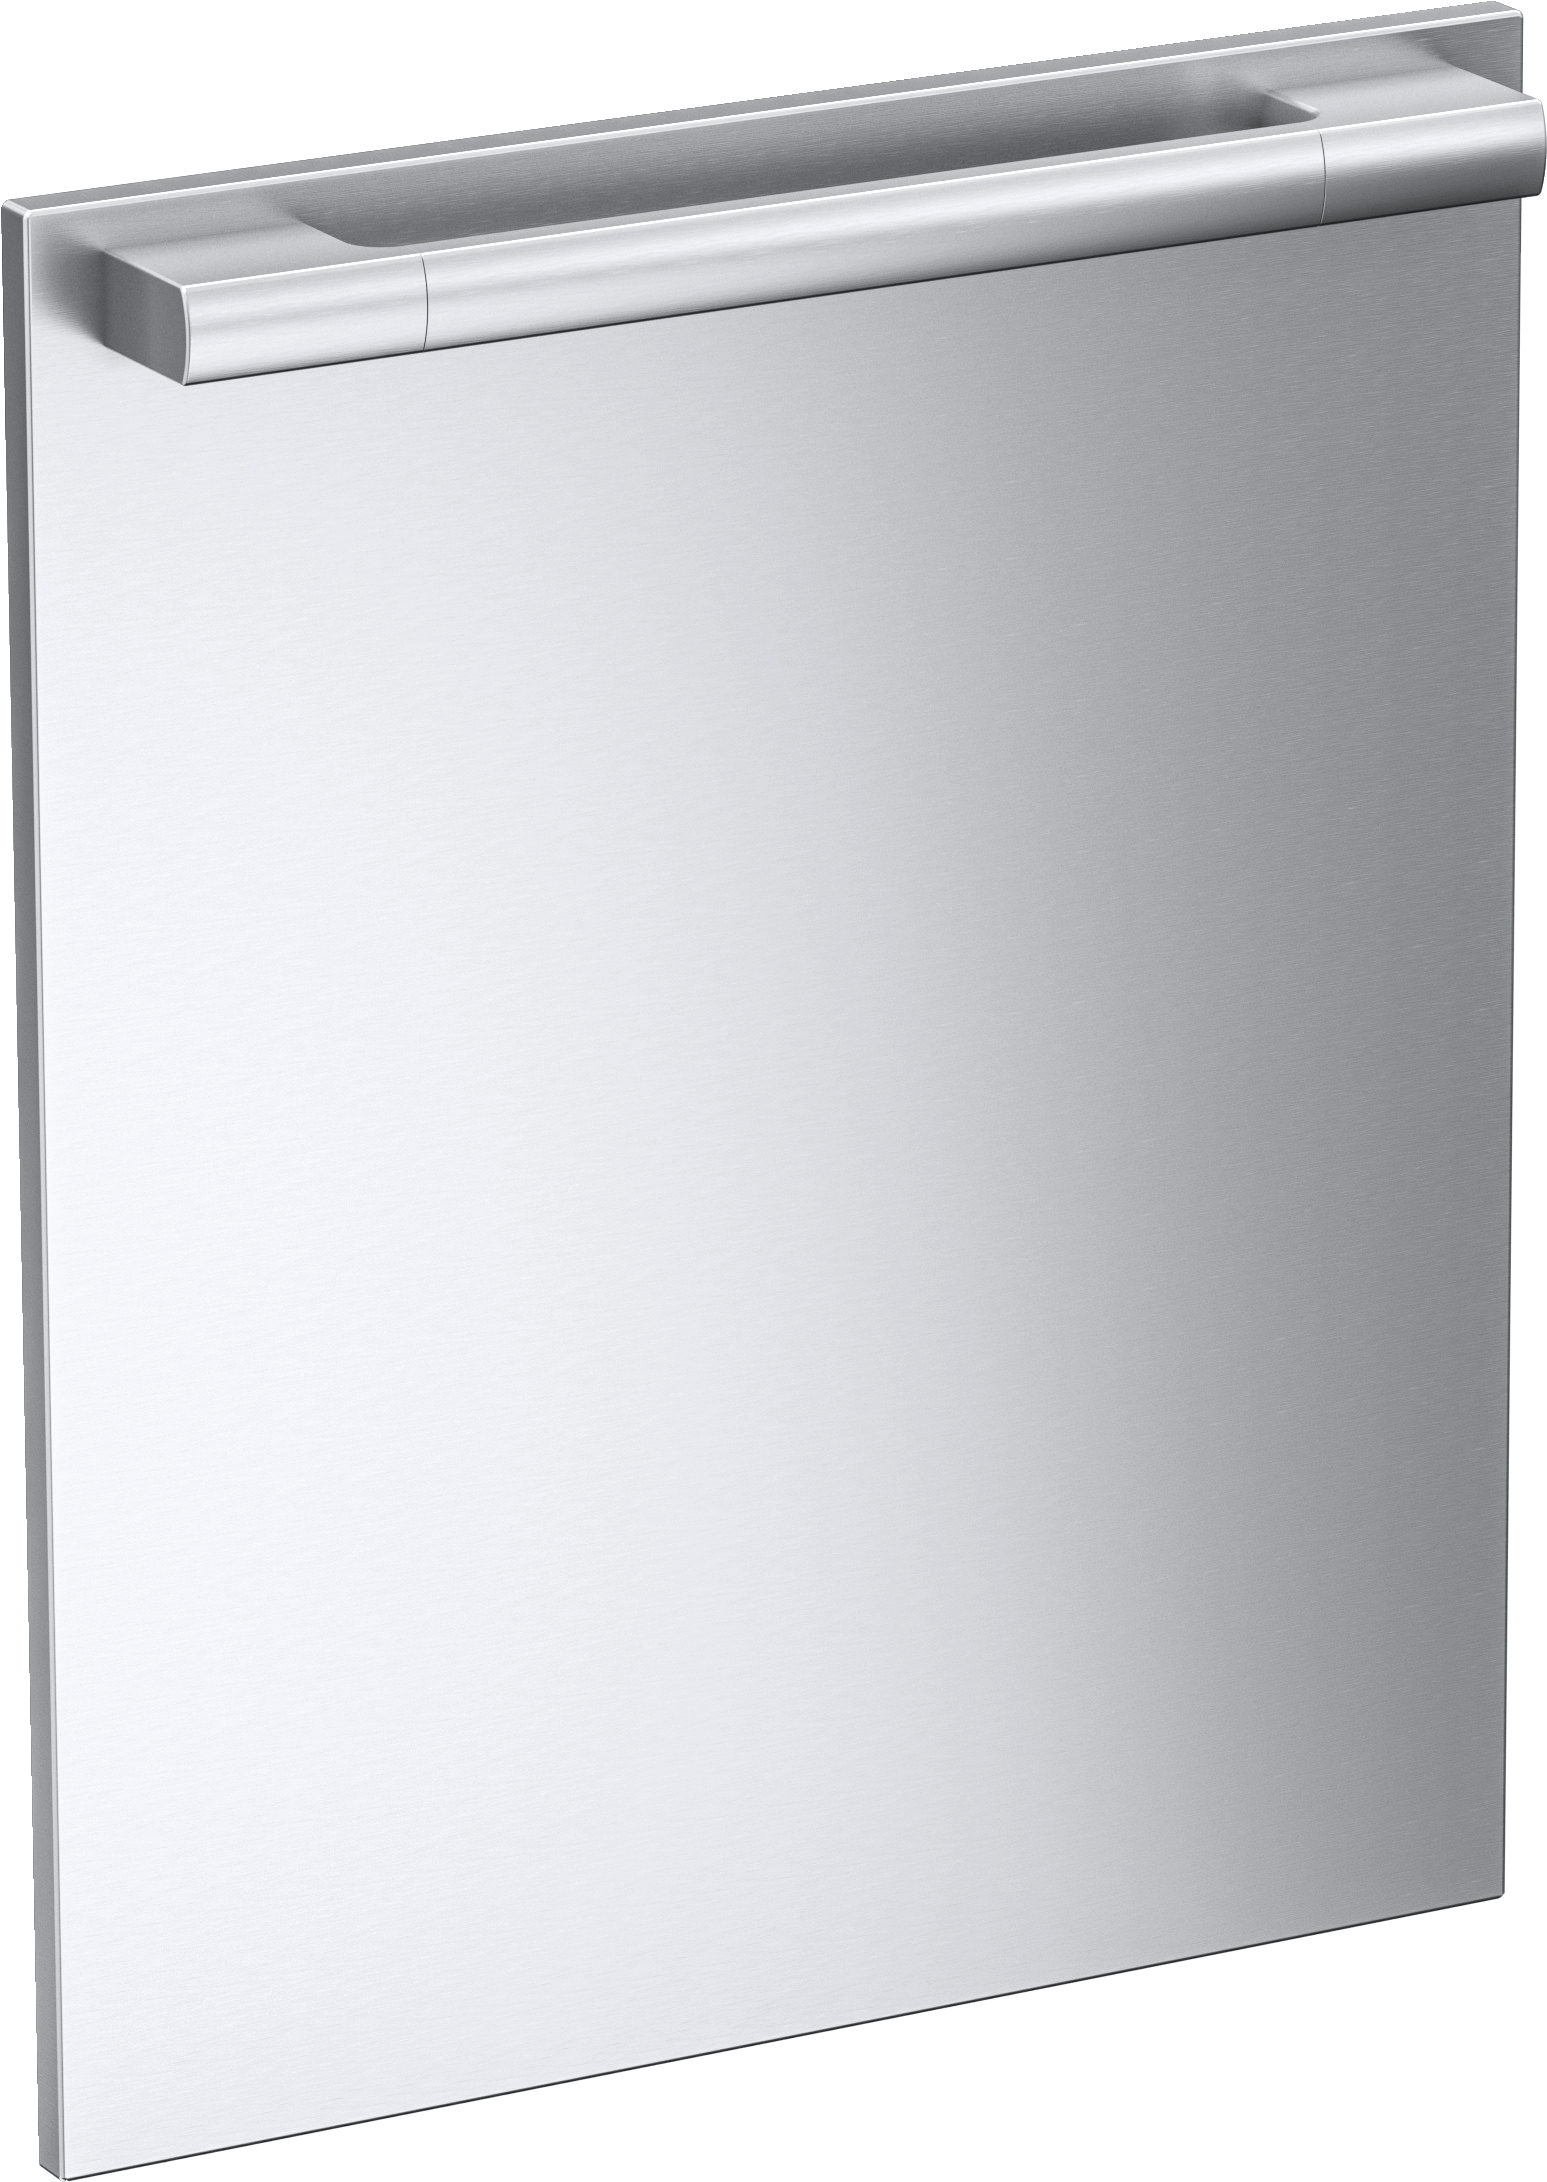 Miele GFVI71177 Gfvi 711/77 - Int. Front Panel: W X H, 24 X 30 In In Clean Touch Steel™ Finish With Handle For Fully Integrated Dishwashers.